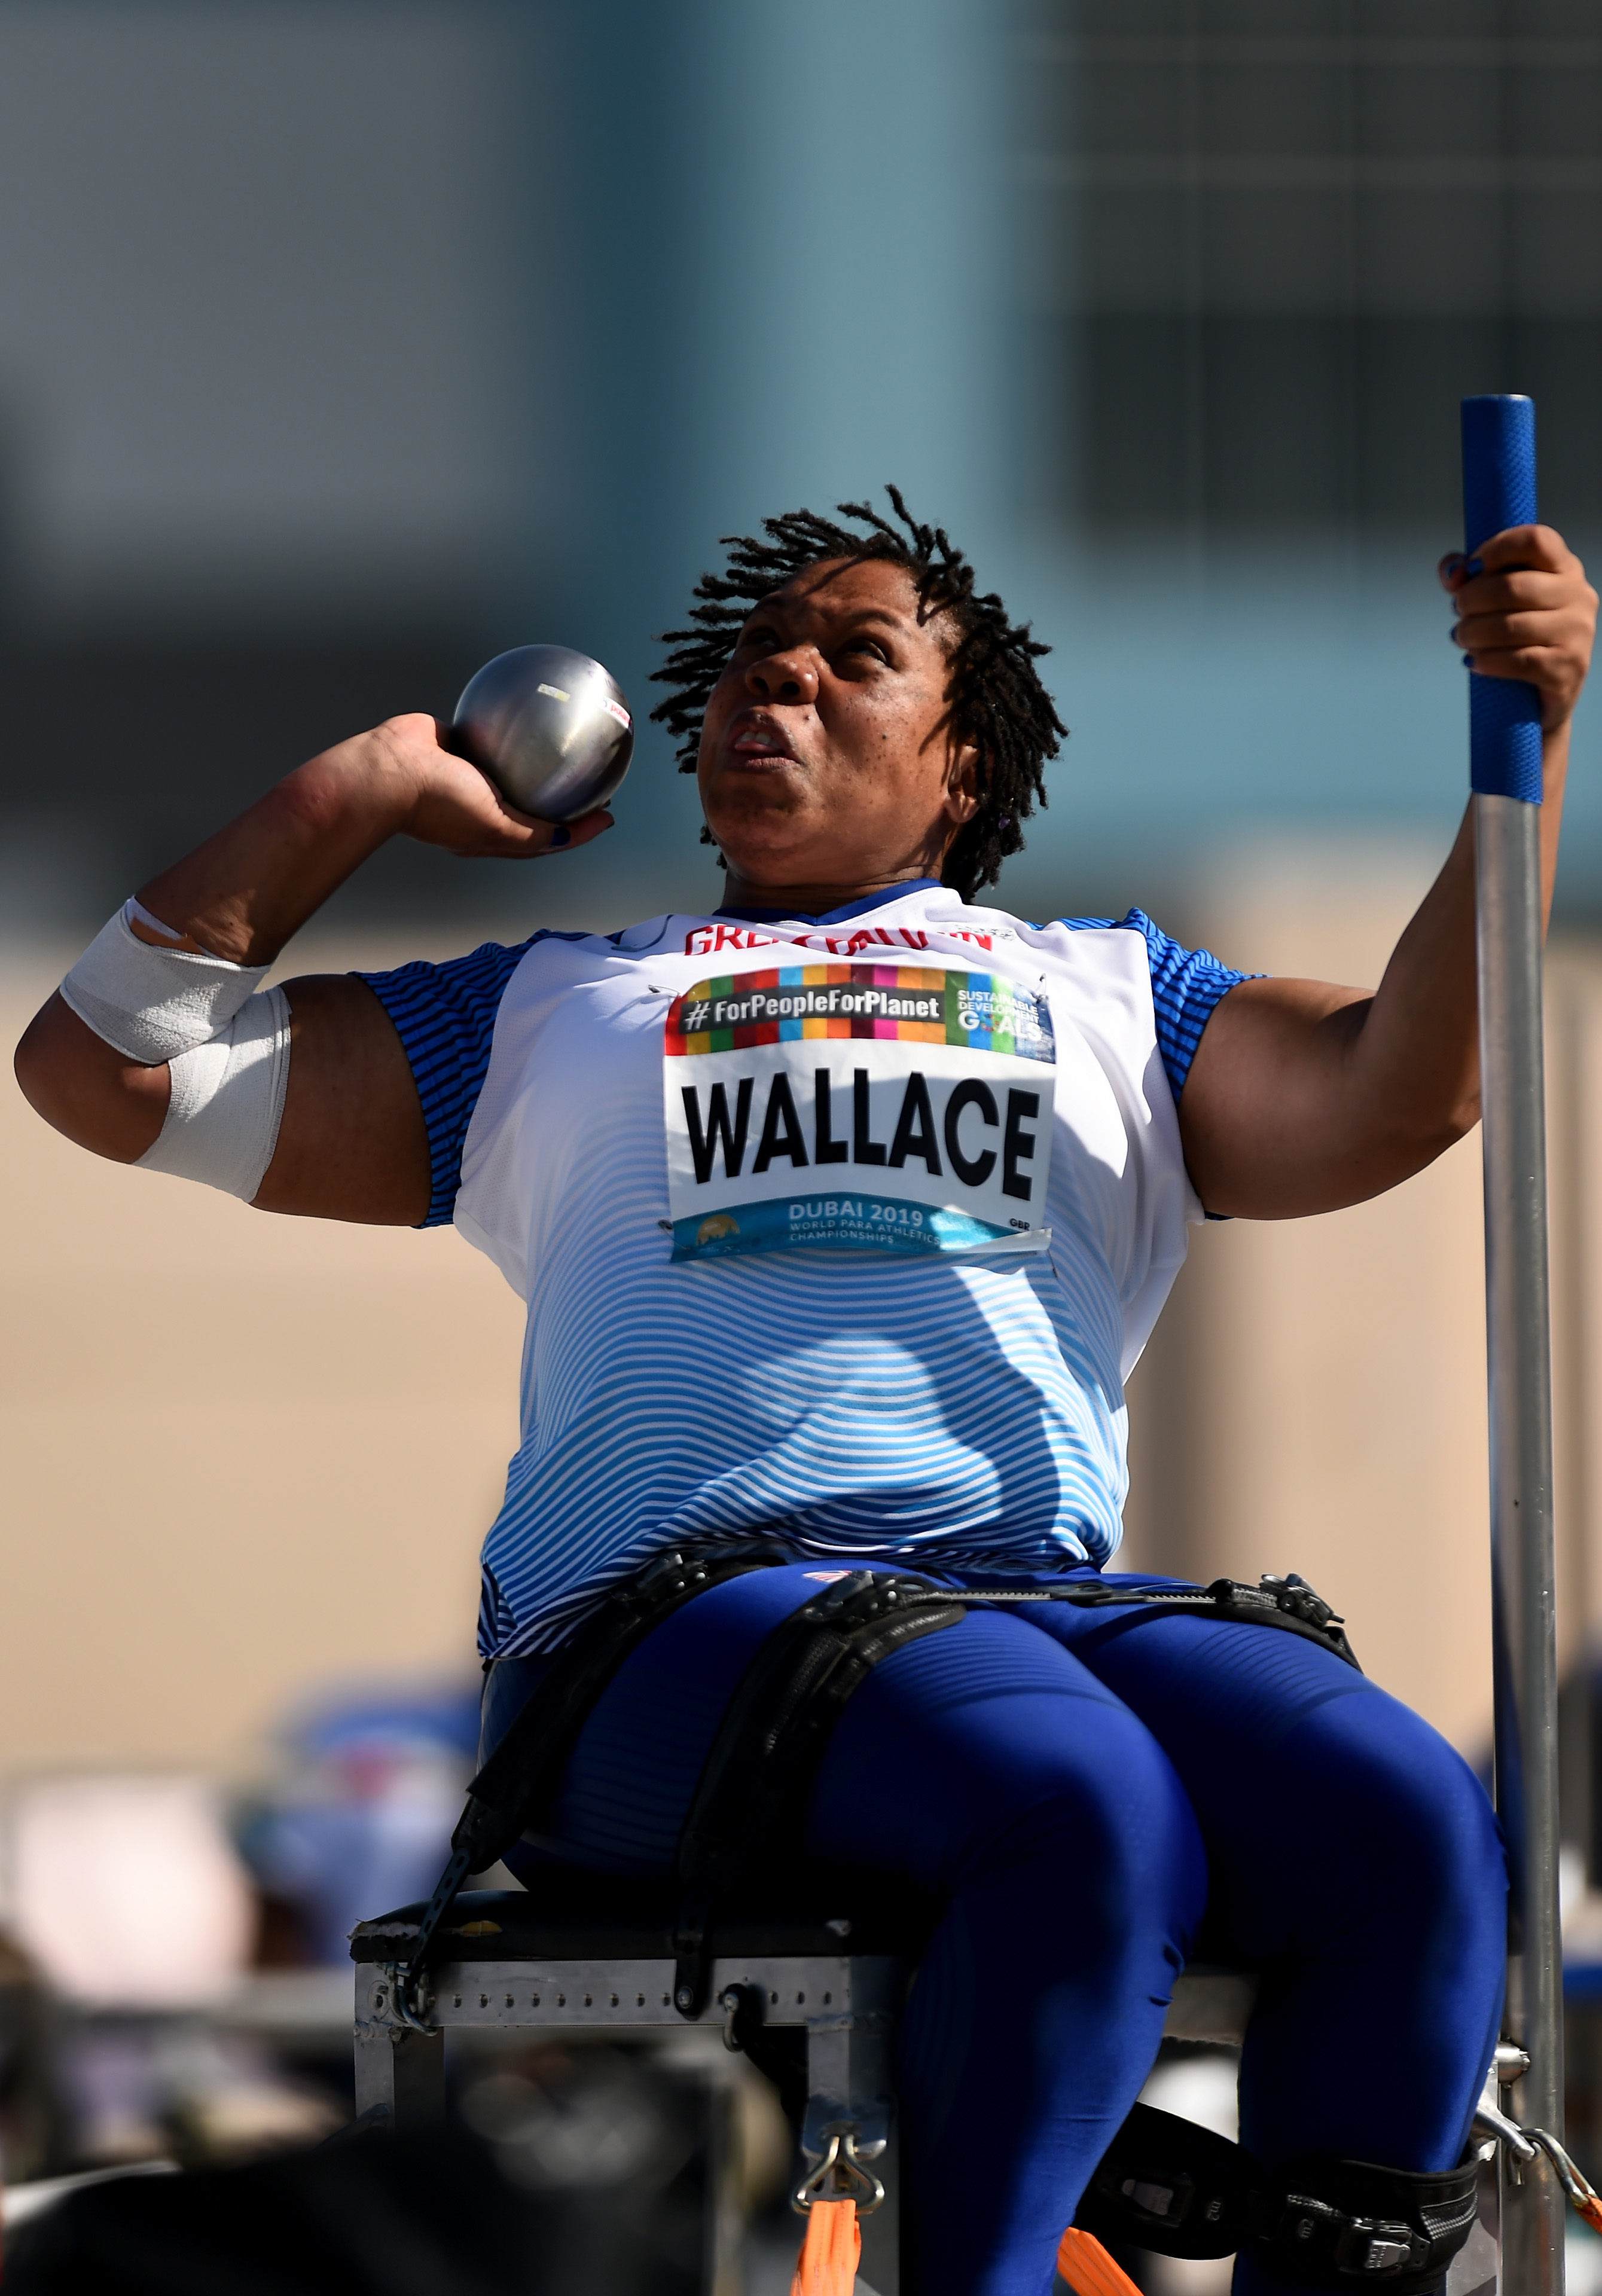 WORLD PARA ATHLETICS MEDALLISTS AND FINALISTS RECOGNISED IN 2020 PARALYMPIC WCP